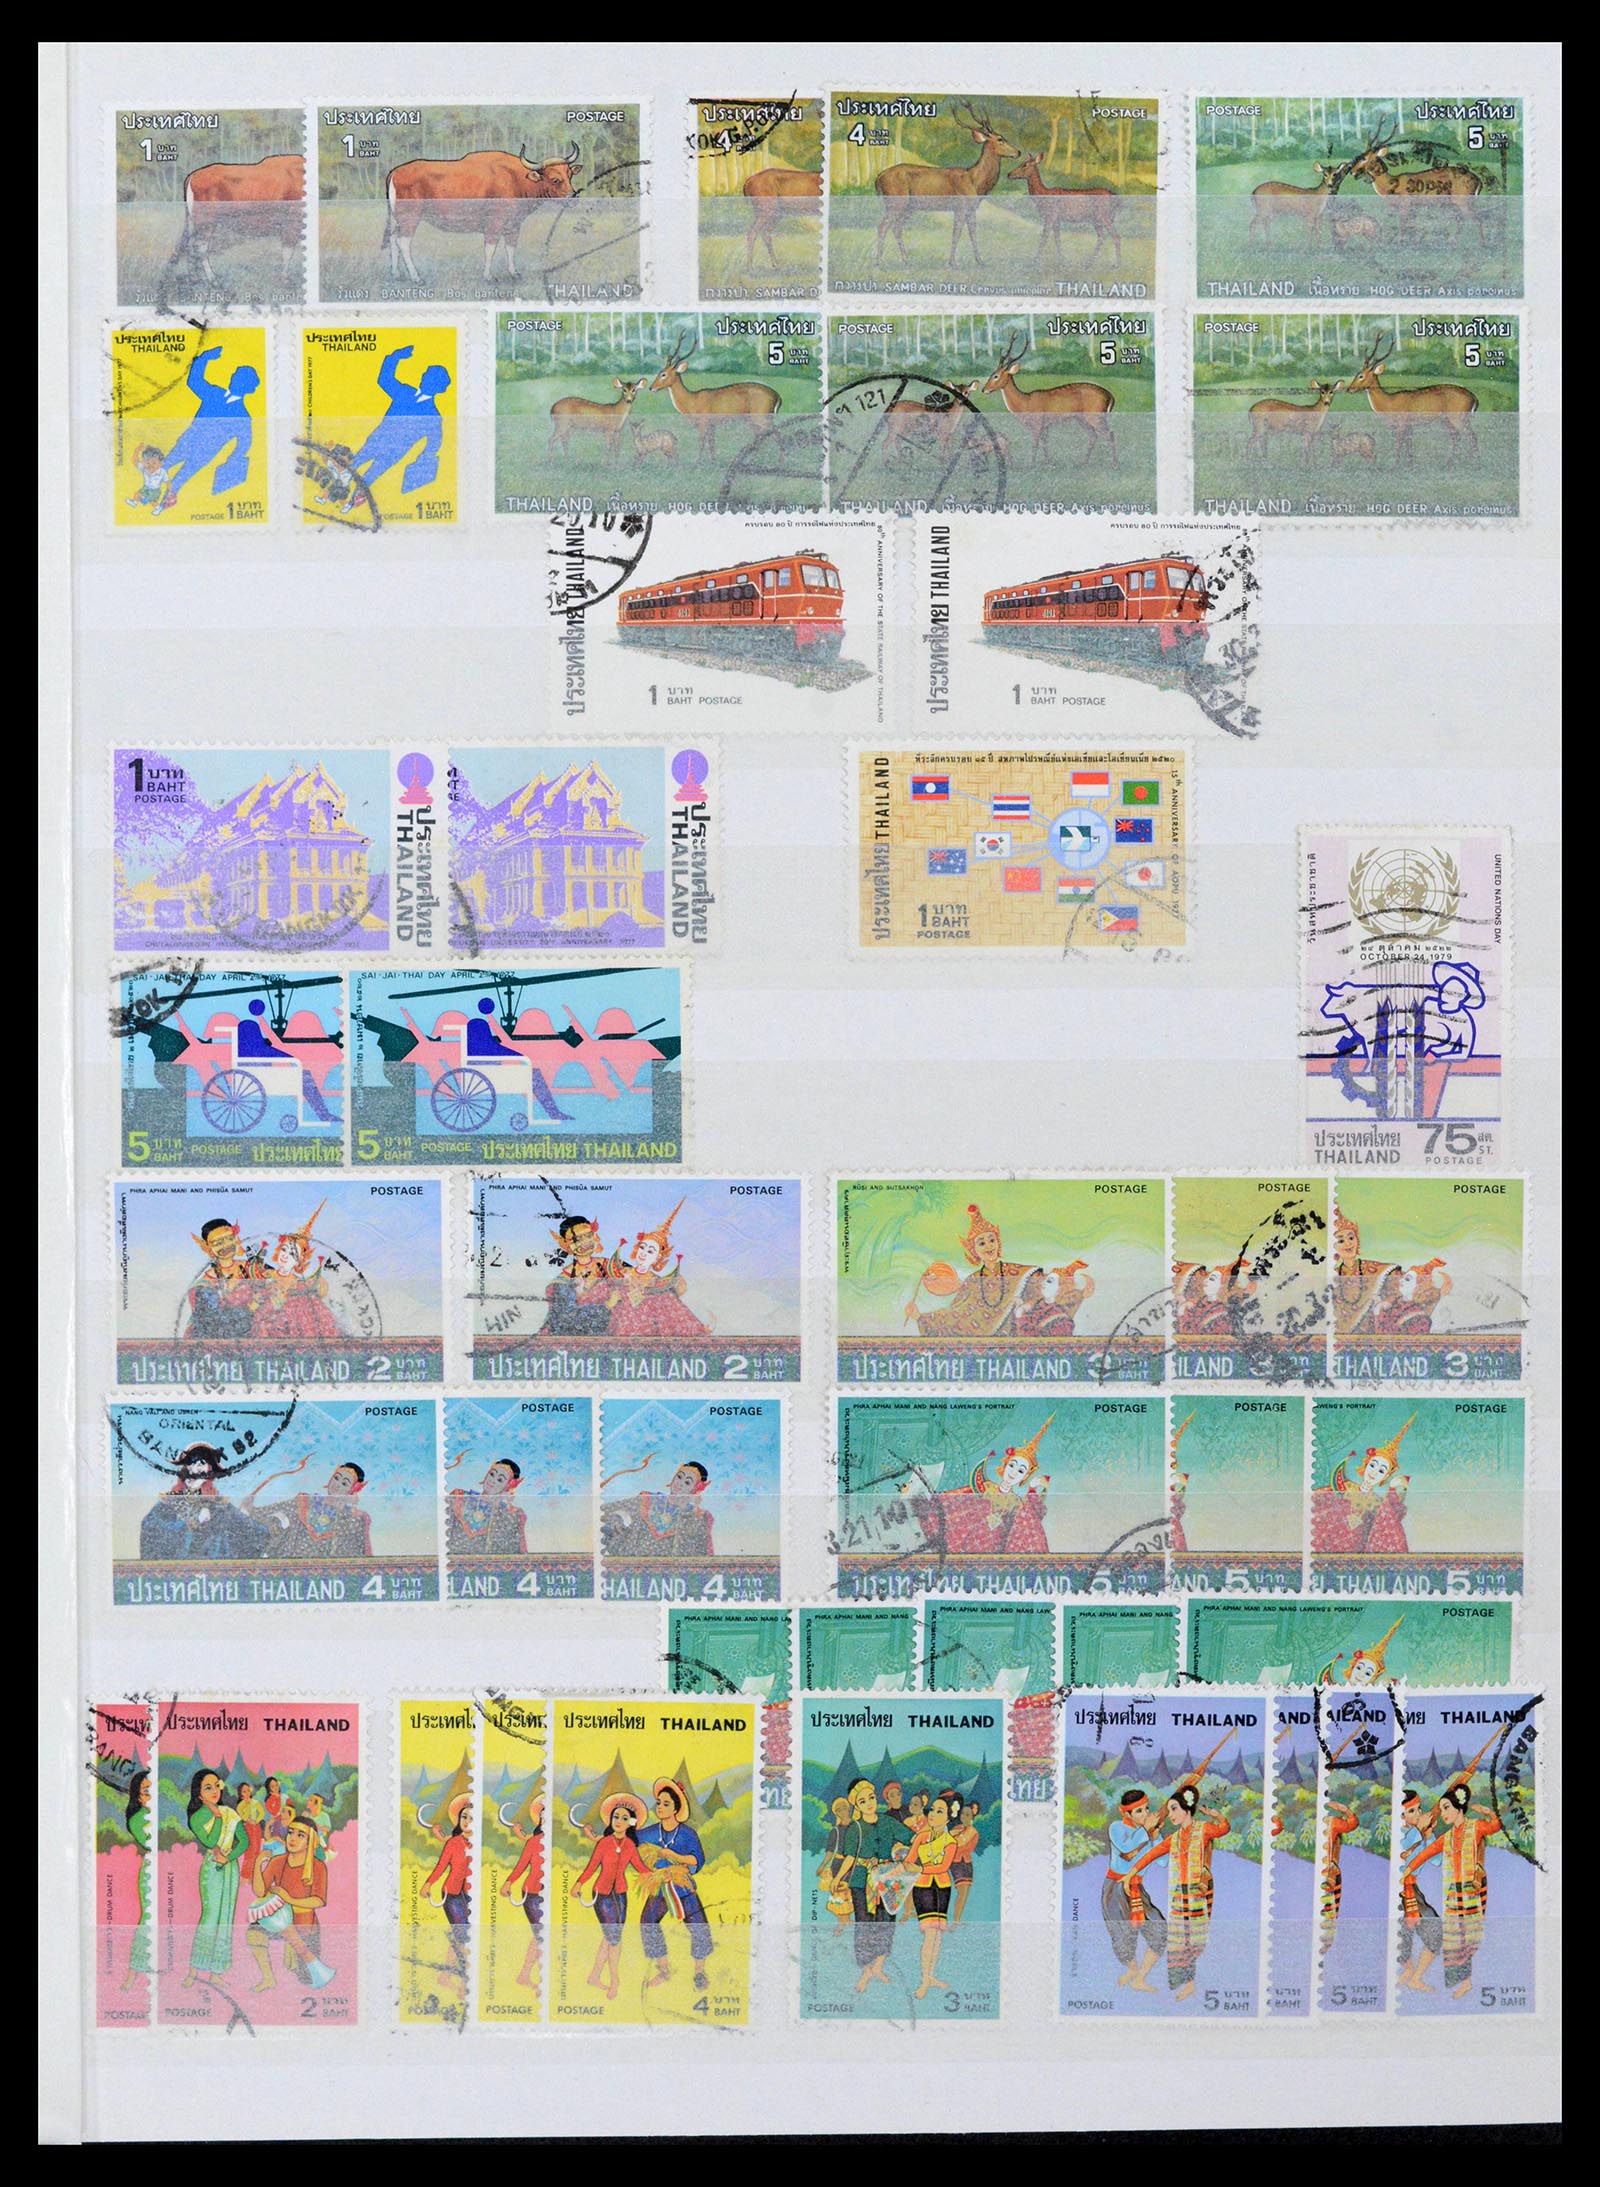 39384 0041 - Stamp collection 39384 Thailand 1883-2014.